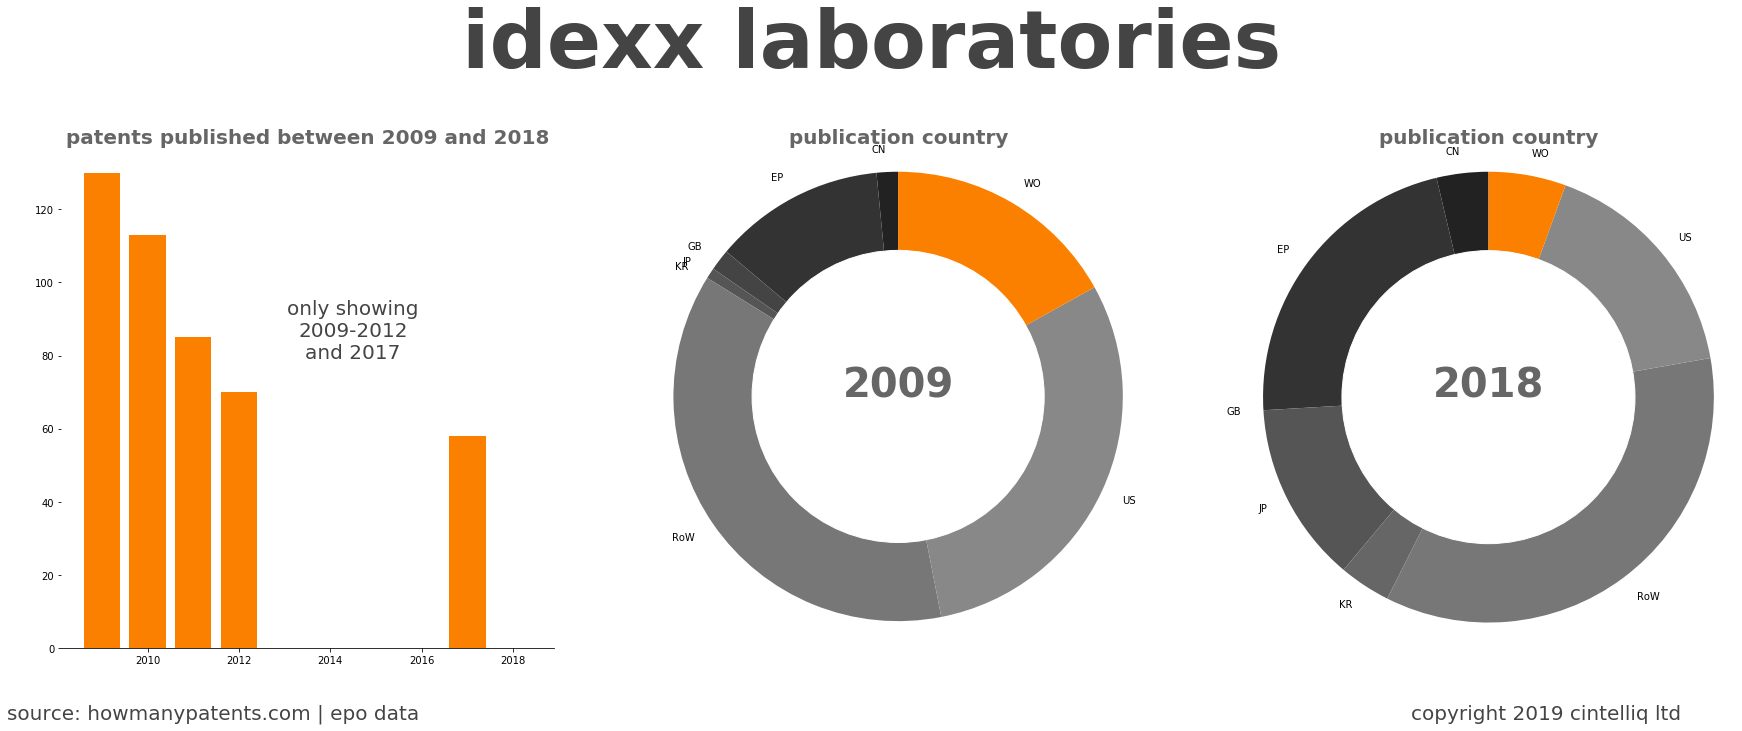 summary of patents for Idexx Laboratories